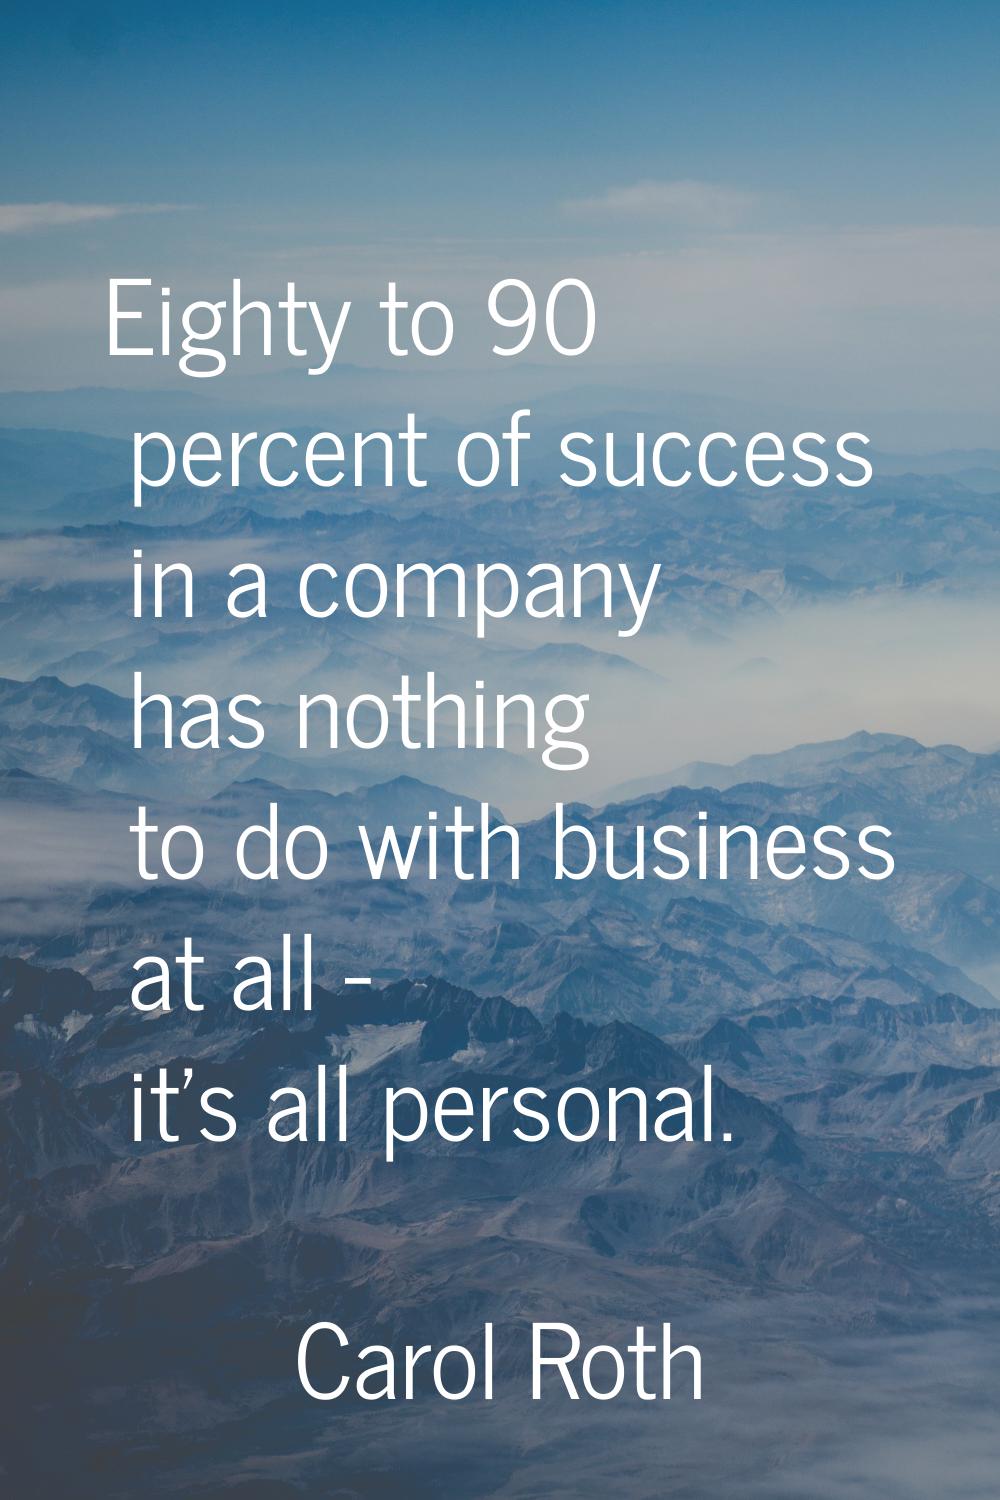 Eighty to 90 percent of success in a company has nothing to do with business at all - it's all pers